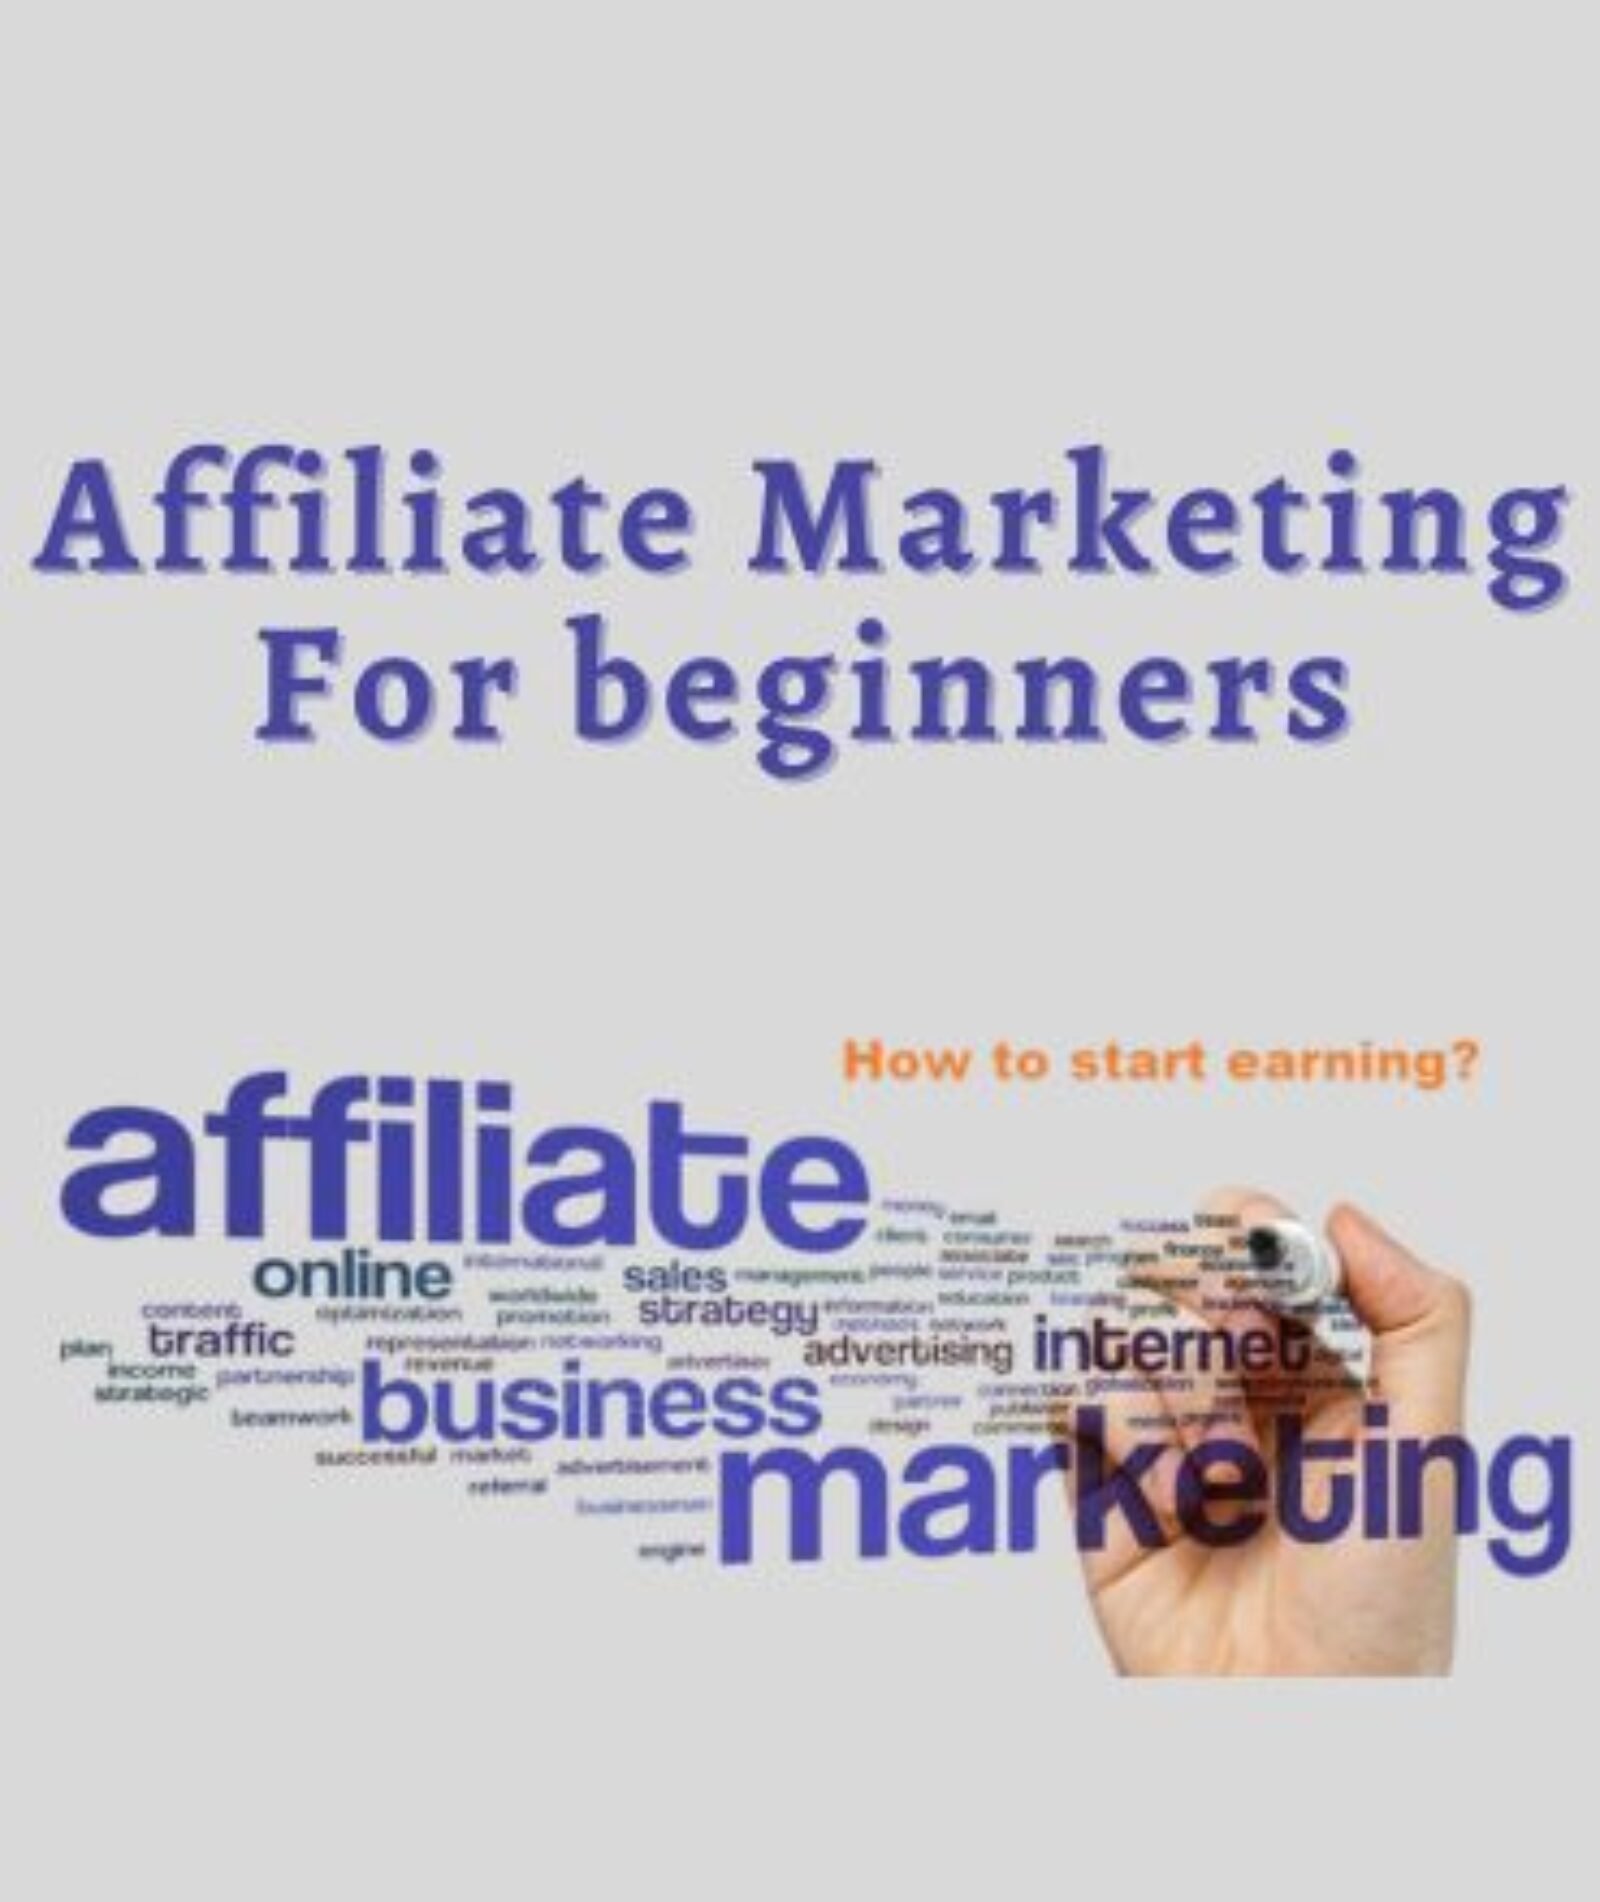 How To Earn Via Affiliate Marketing As a Student: A Guide By iTSoftExpert